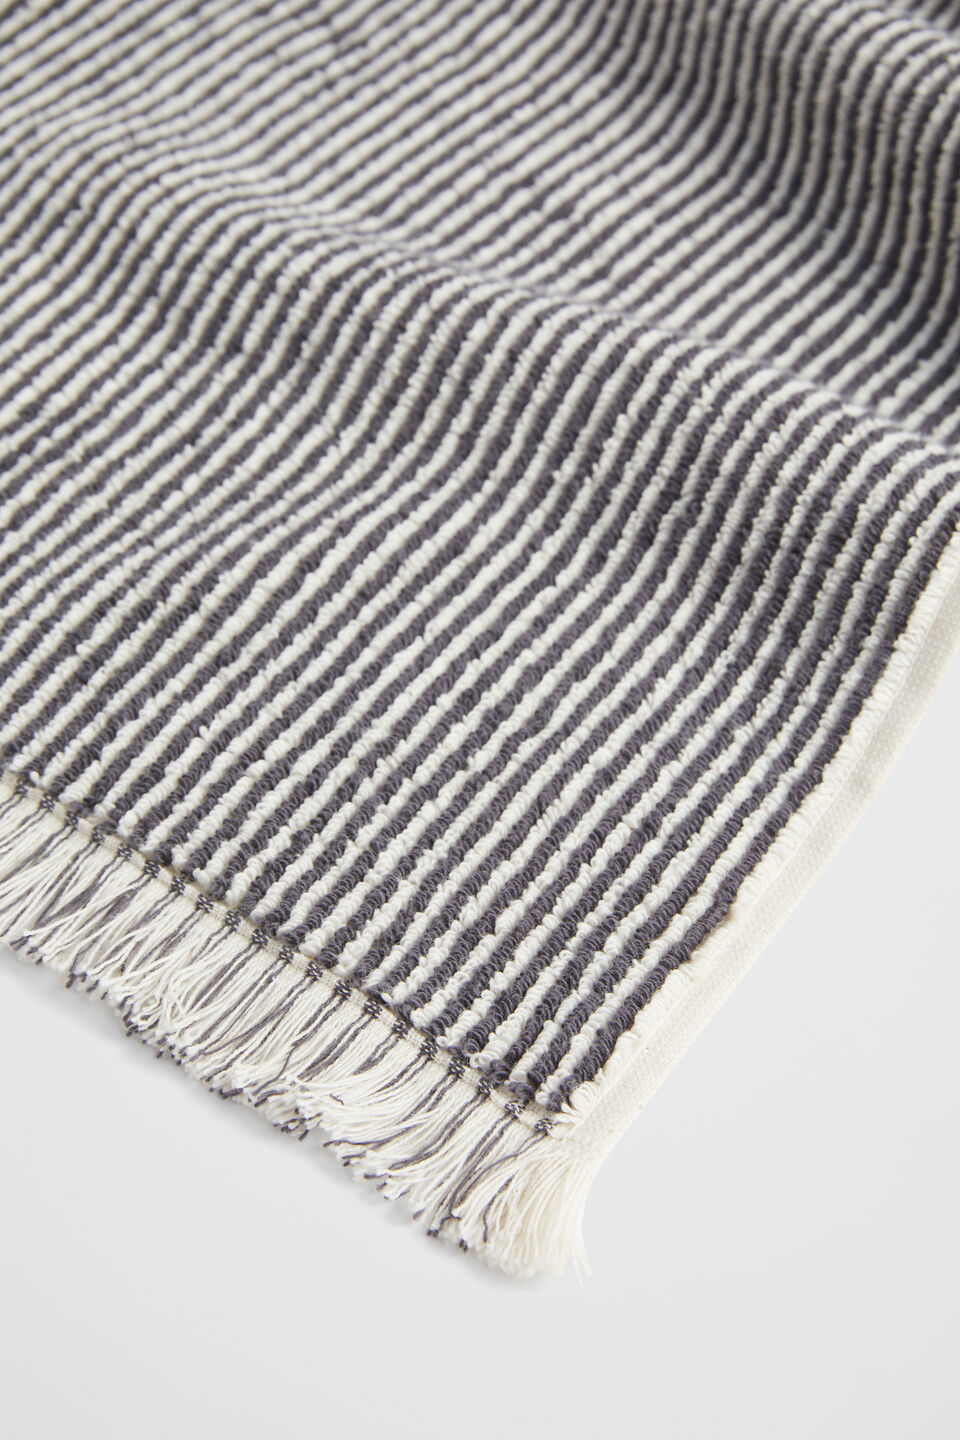 Stripe Textured Towel  Charcoal